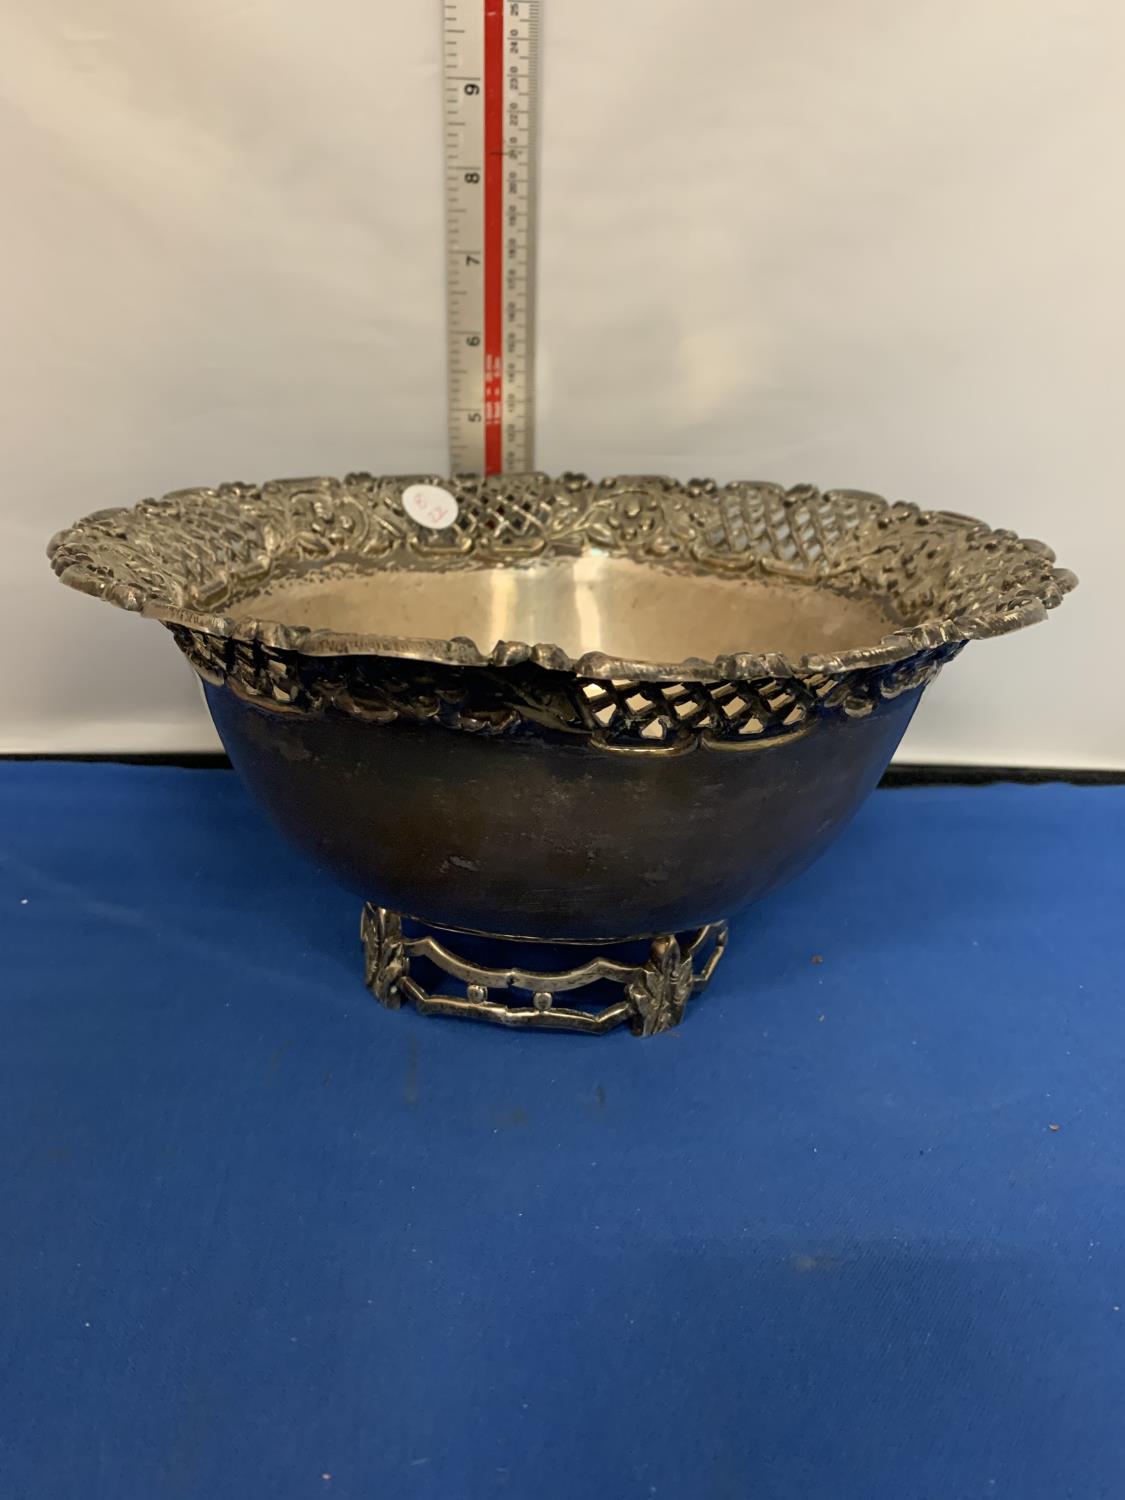 A CONTINENTAL SILVER FOOTED FRUIT BOWL WITH EMBOSSED FOLIAGE AND PIERCED FRETWORK DECORATION. 12 X